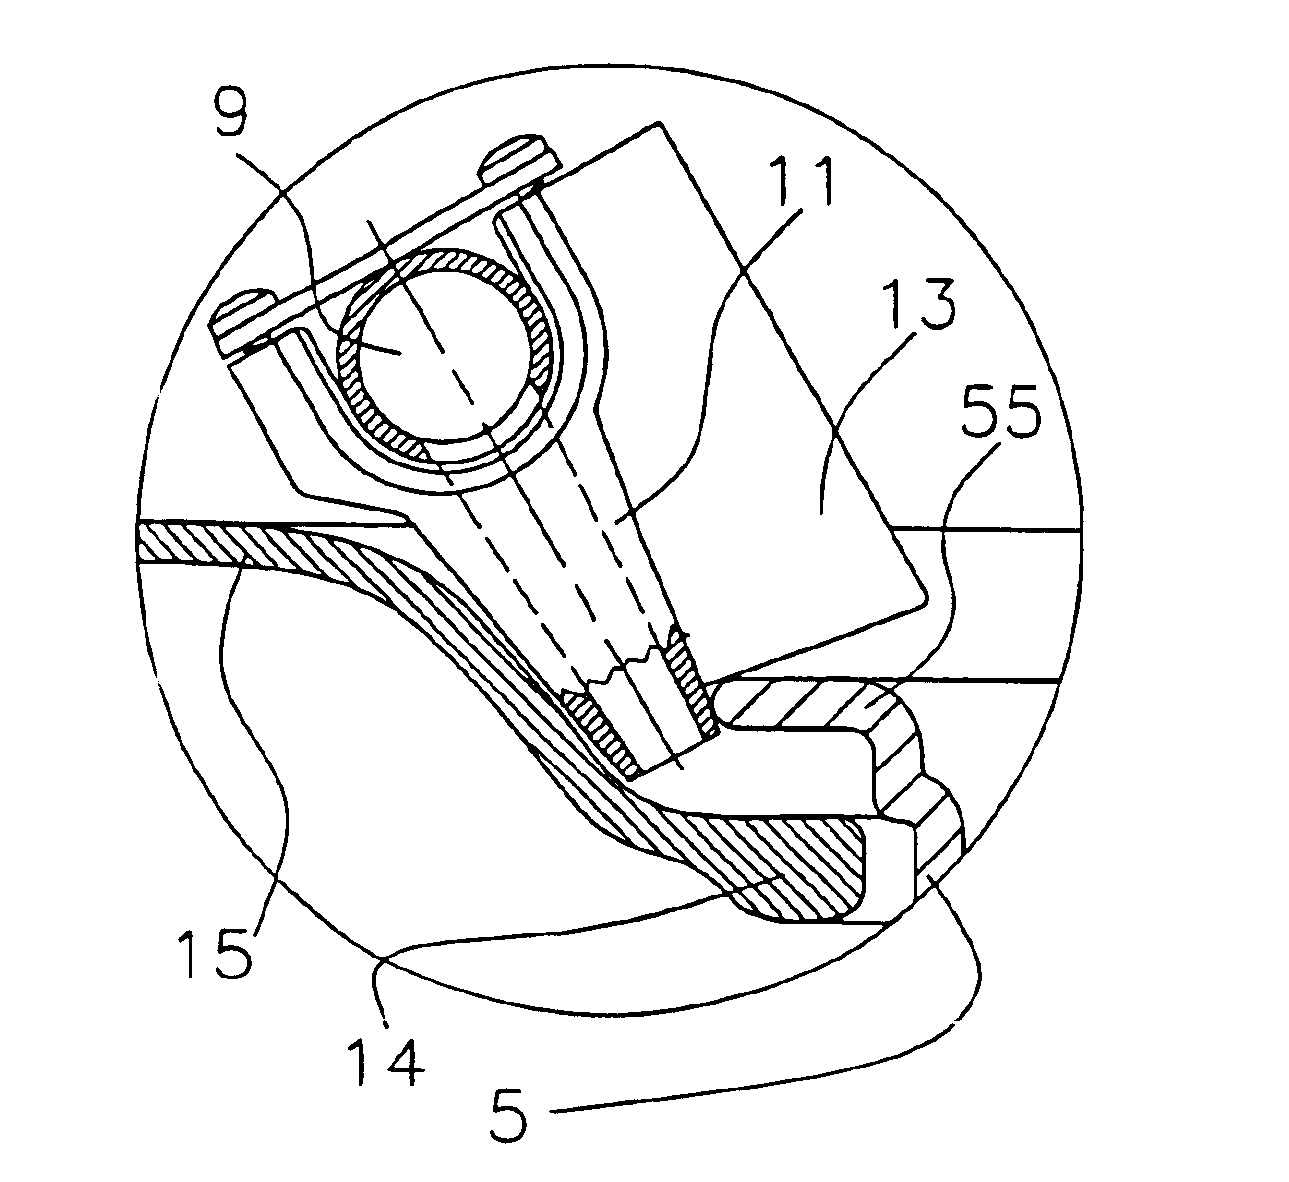 Device for tubeless tire bead engagement and inflation